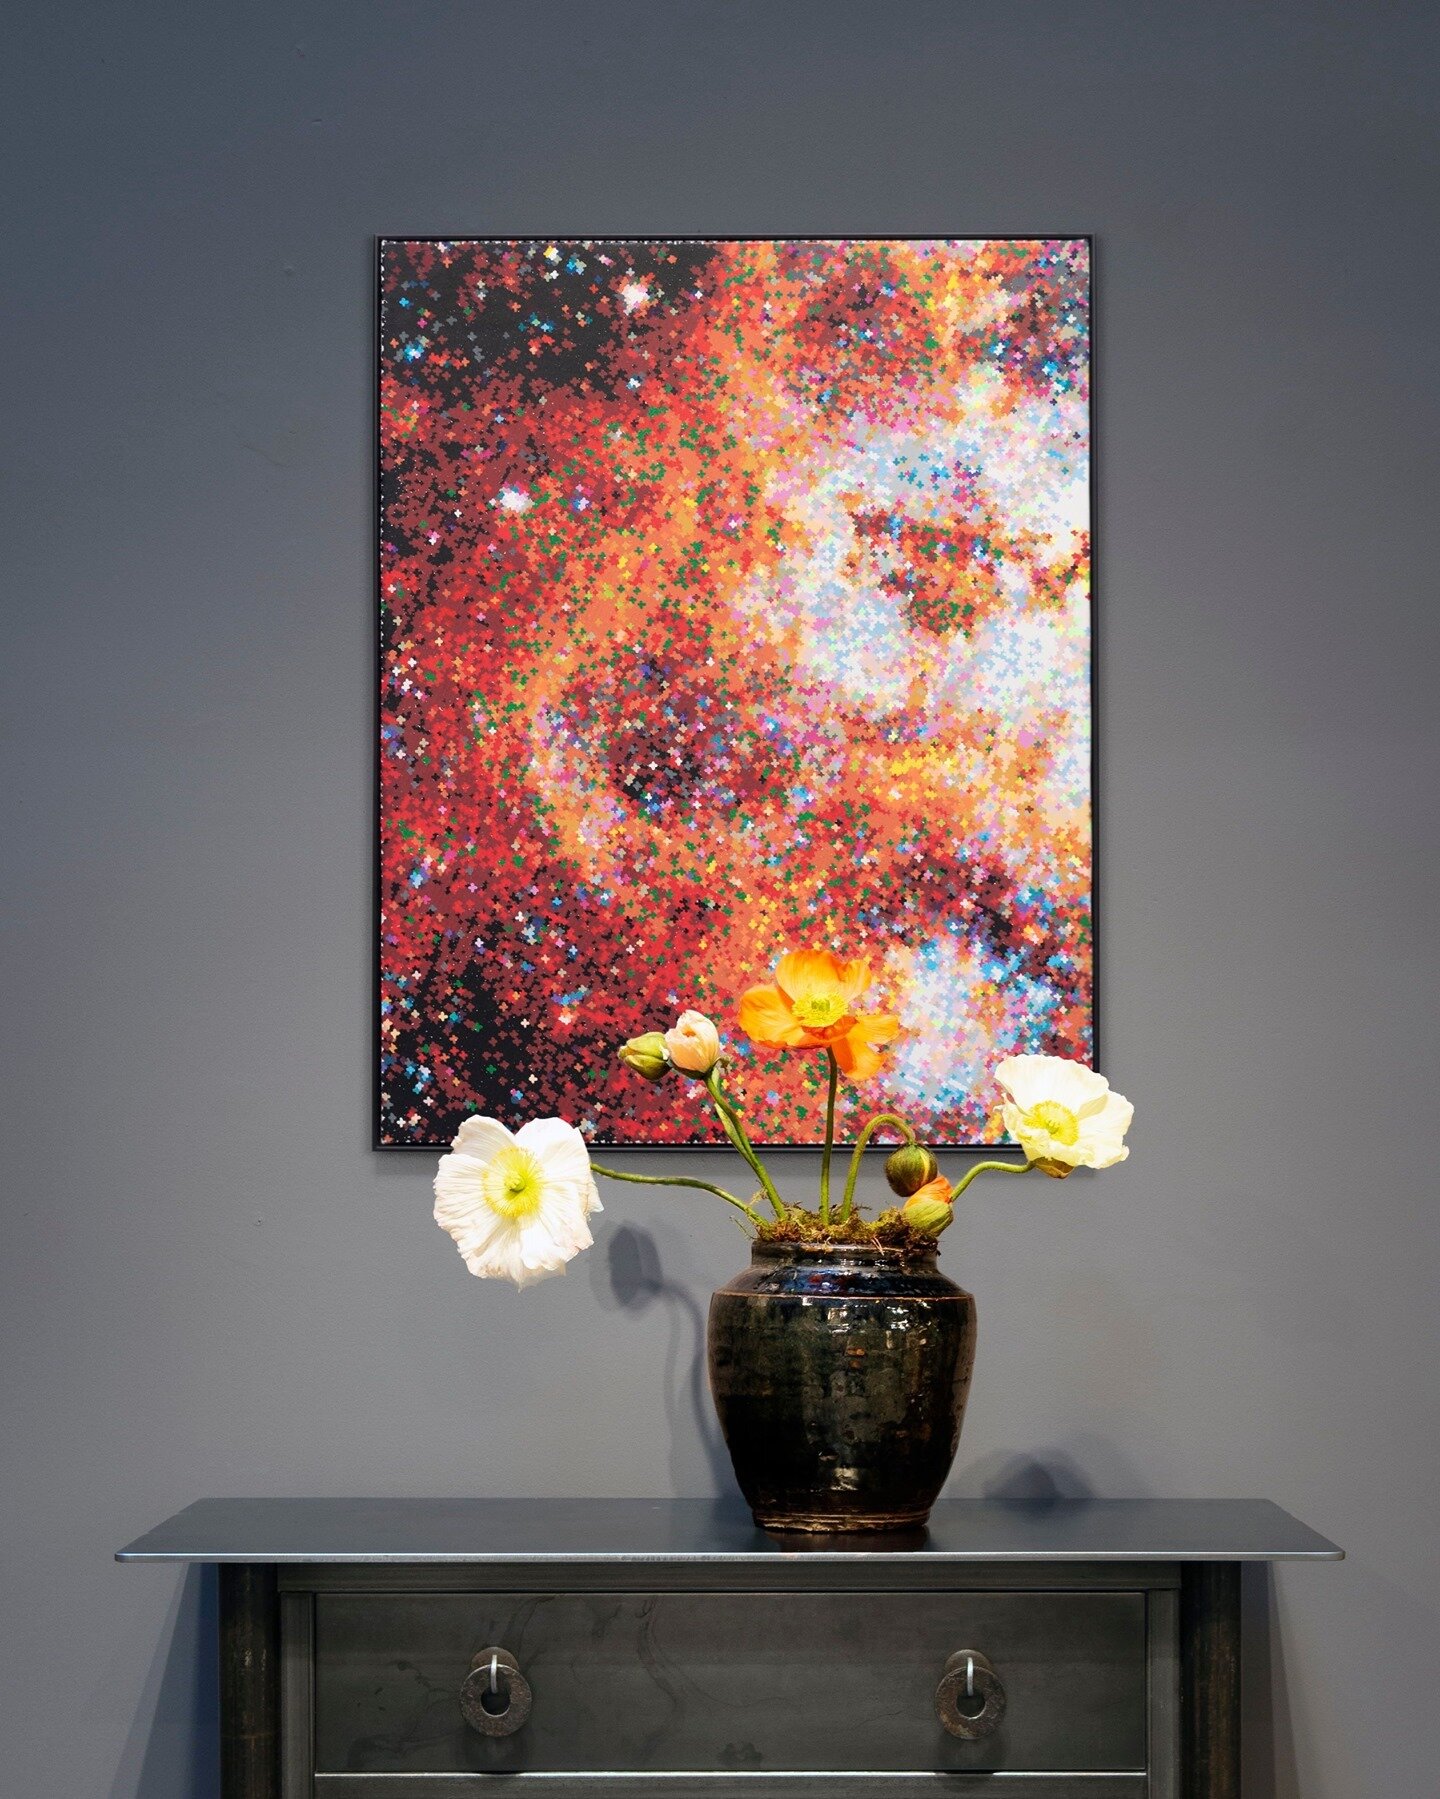 Happy Valentine's Day! 🧡❤⁣
.⁣
.⁣
.⁣
.⁣
.⁣
Entitled Study for Tarantula Nebula, this painting by Chicago-based artist Jan Pieter Fokkens offers a representation of the gigantic star-forming region of the same name. Located in the Large Magellanic Clo